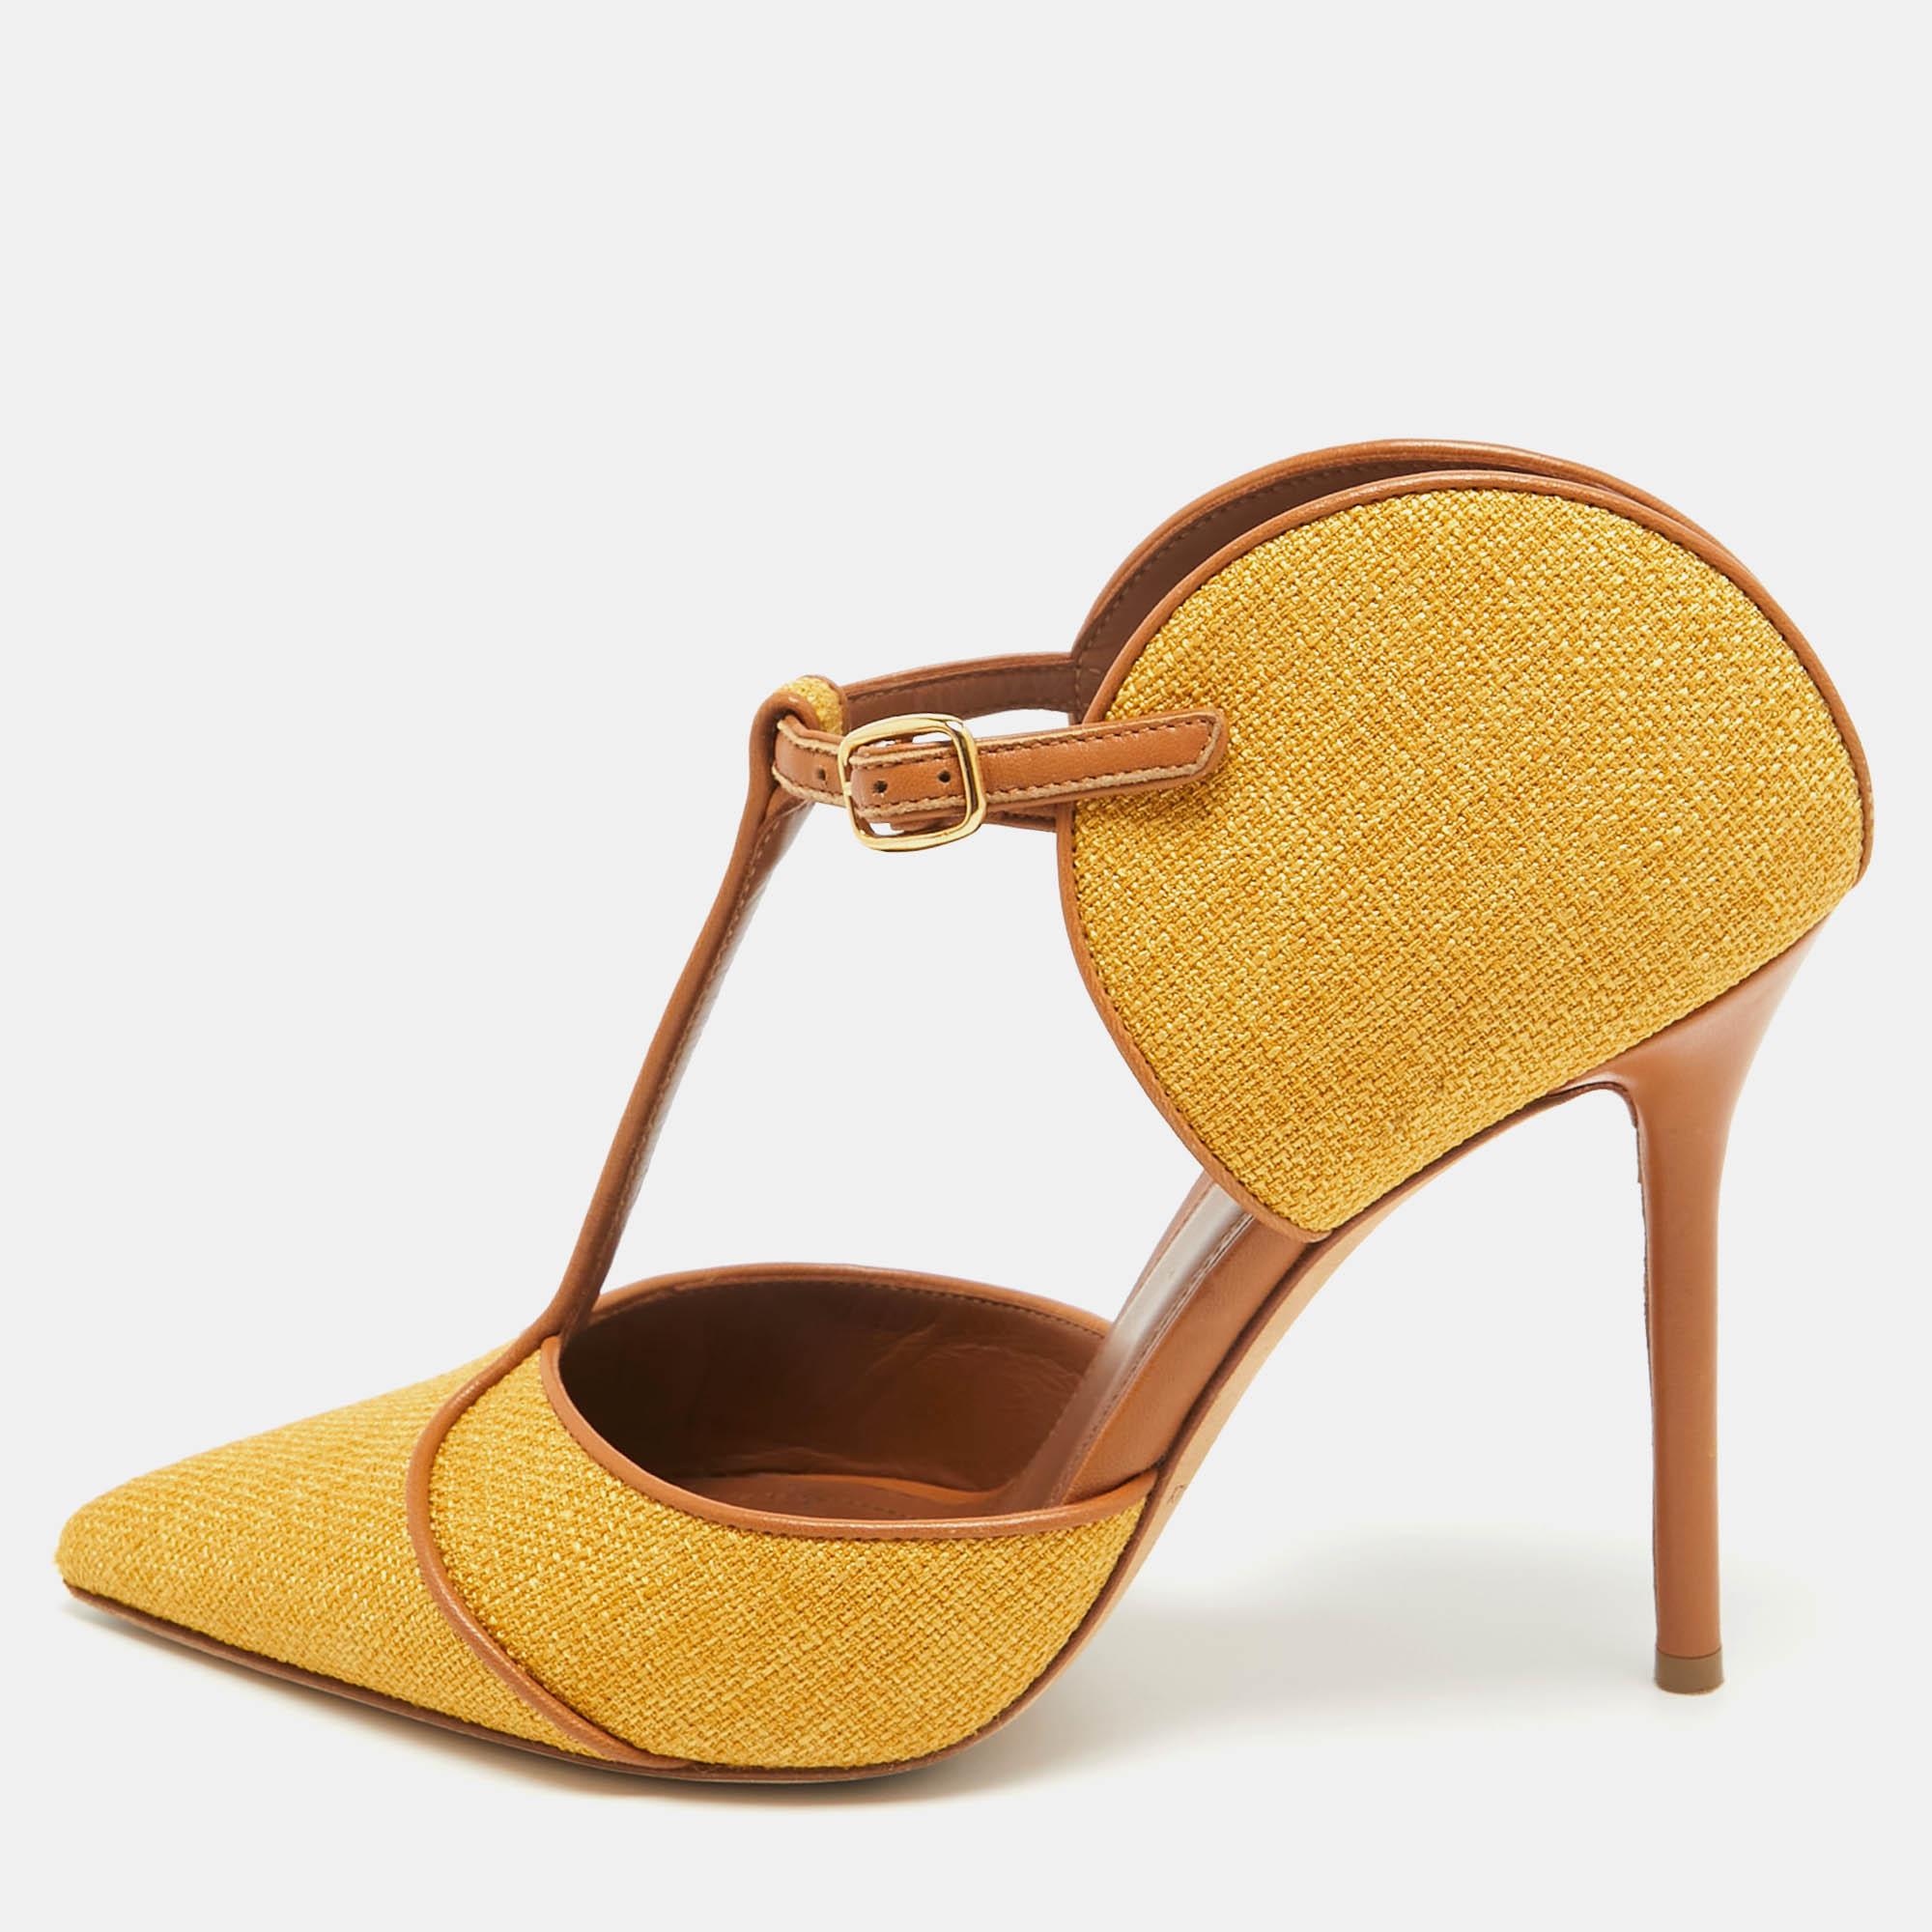 Malone souliers mustard/brown raffia and leather imogen mule sandals size 38